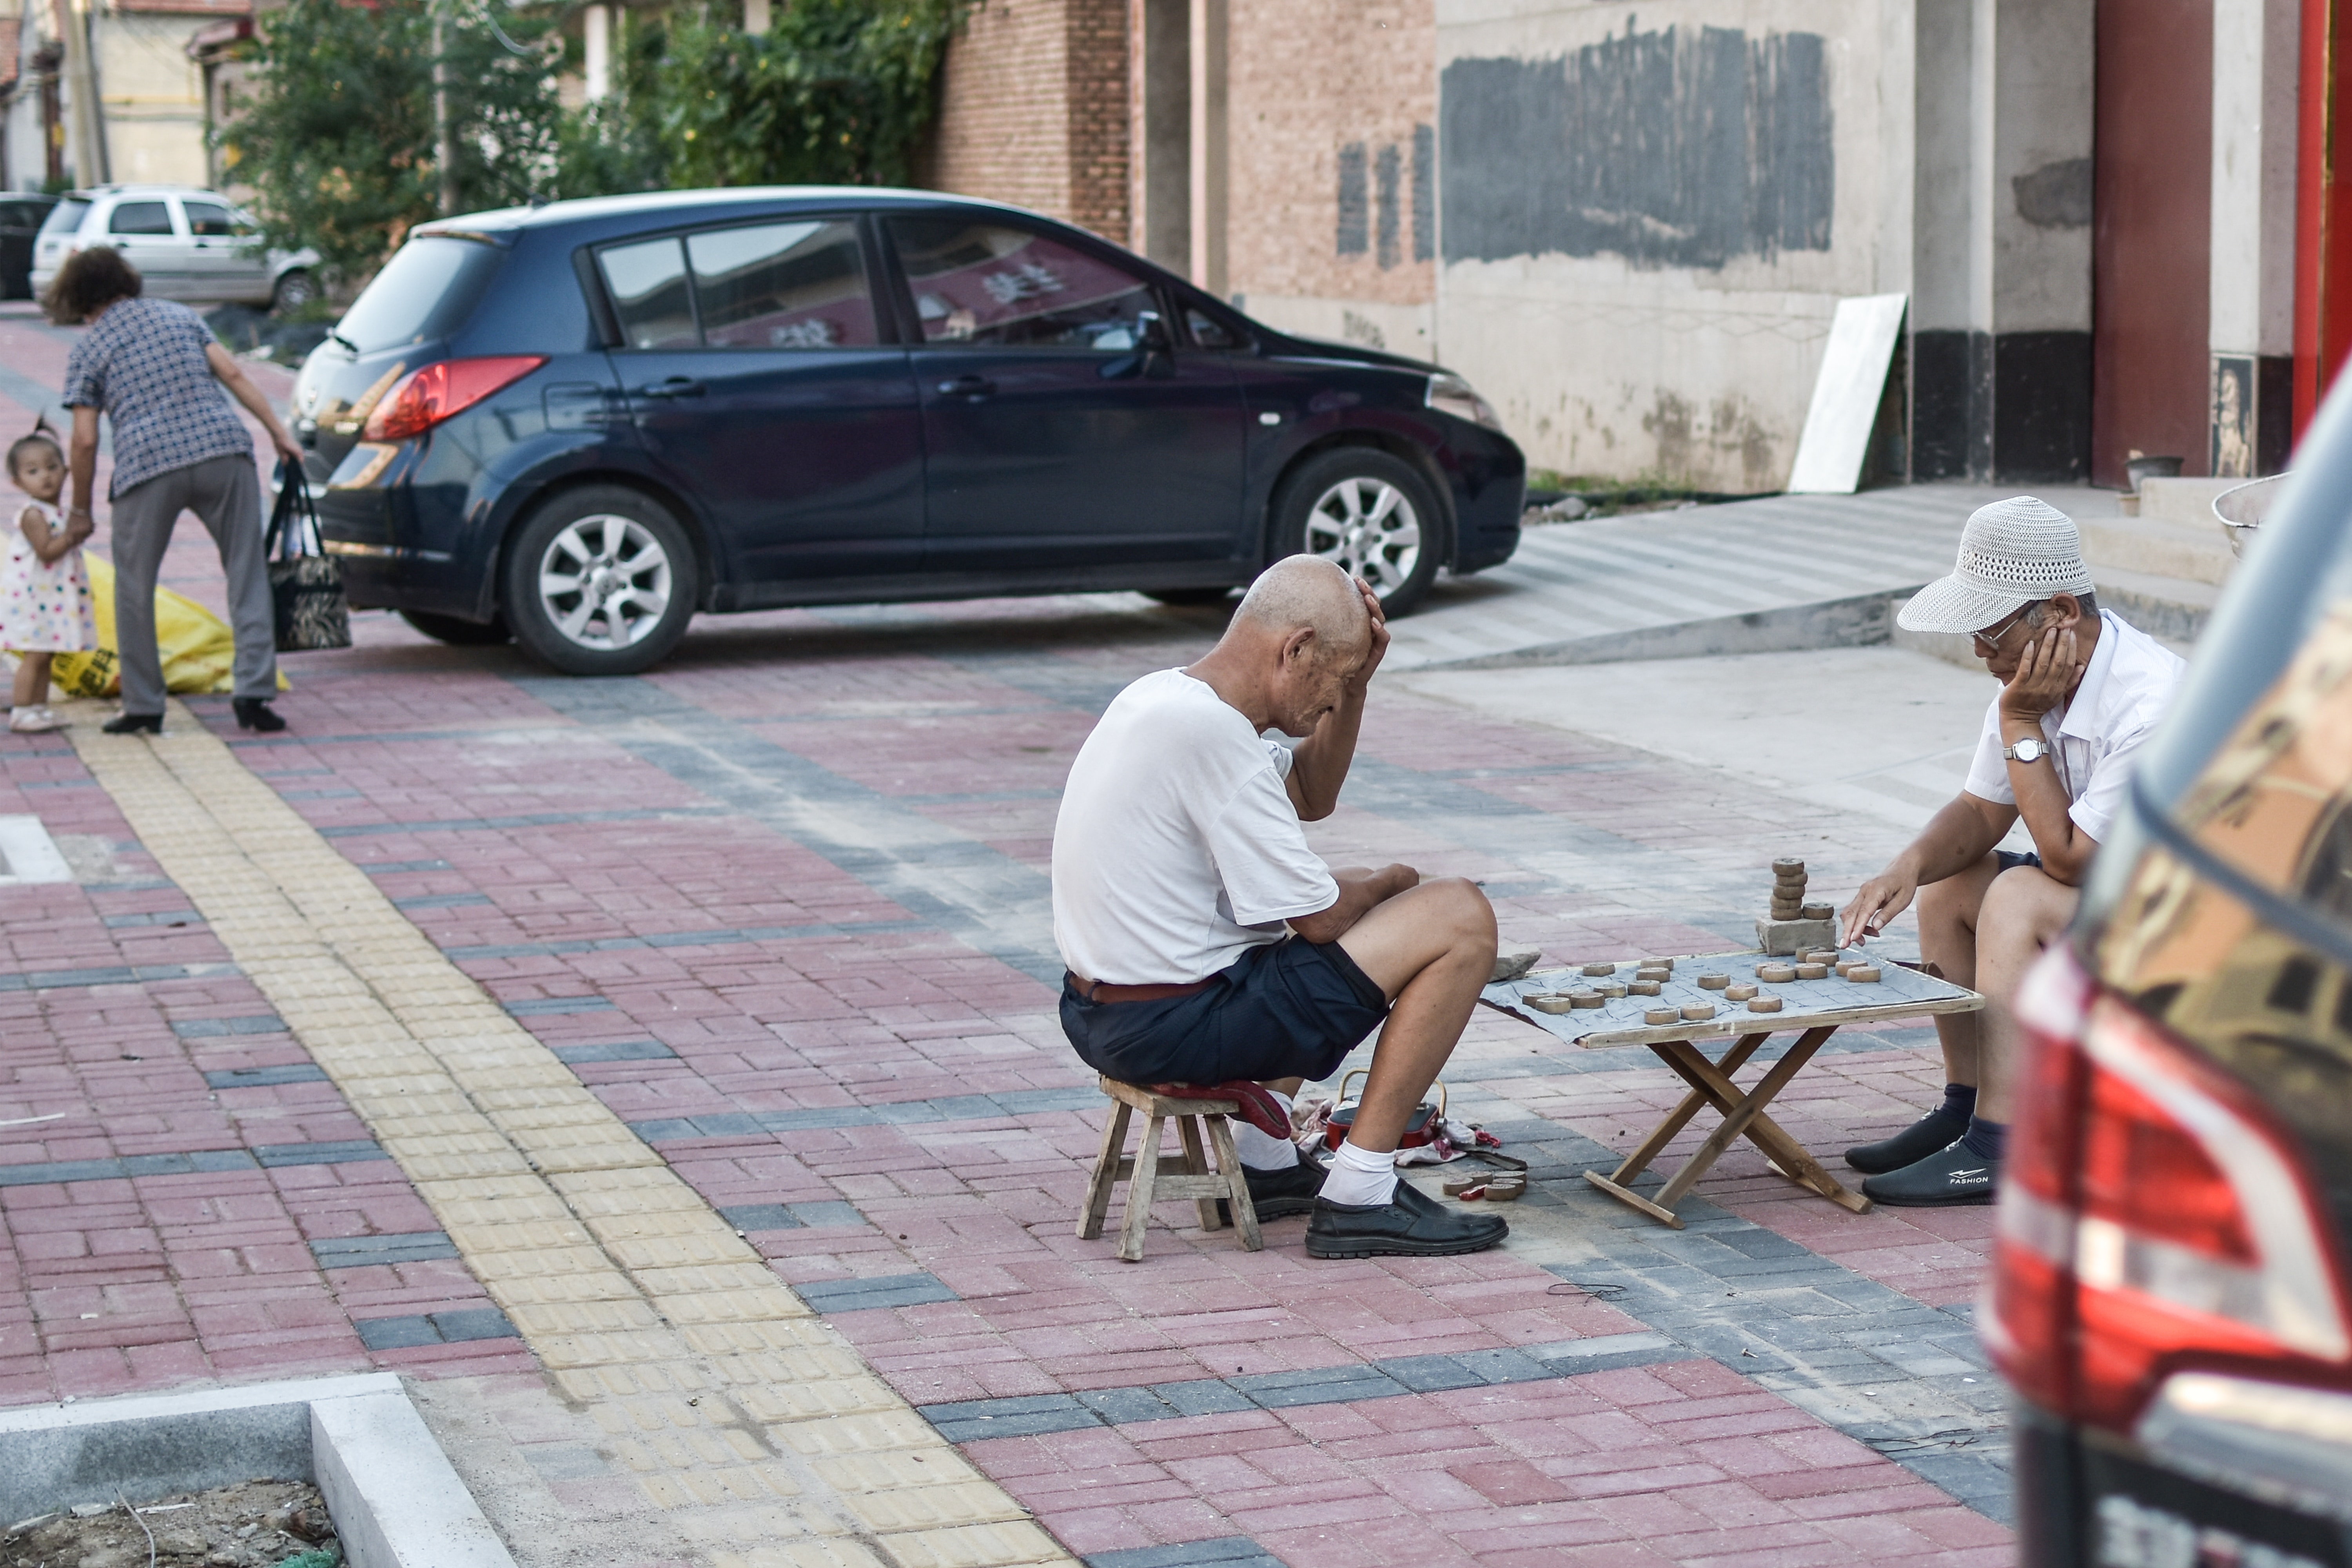 Two elderly men playing chess together on the street.